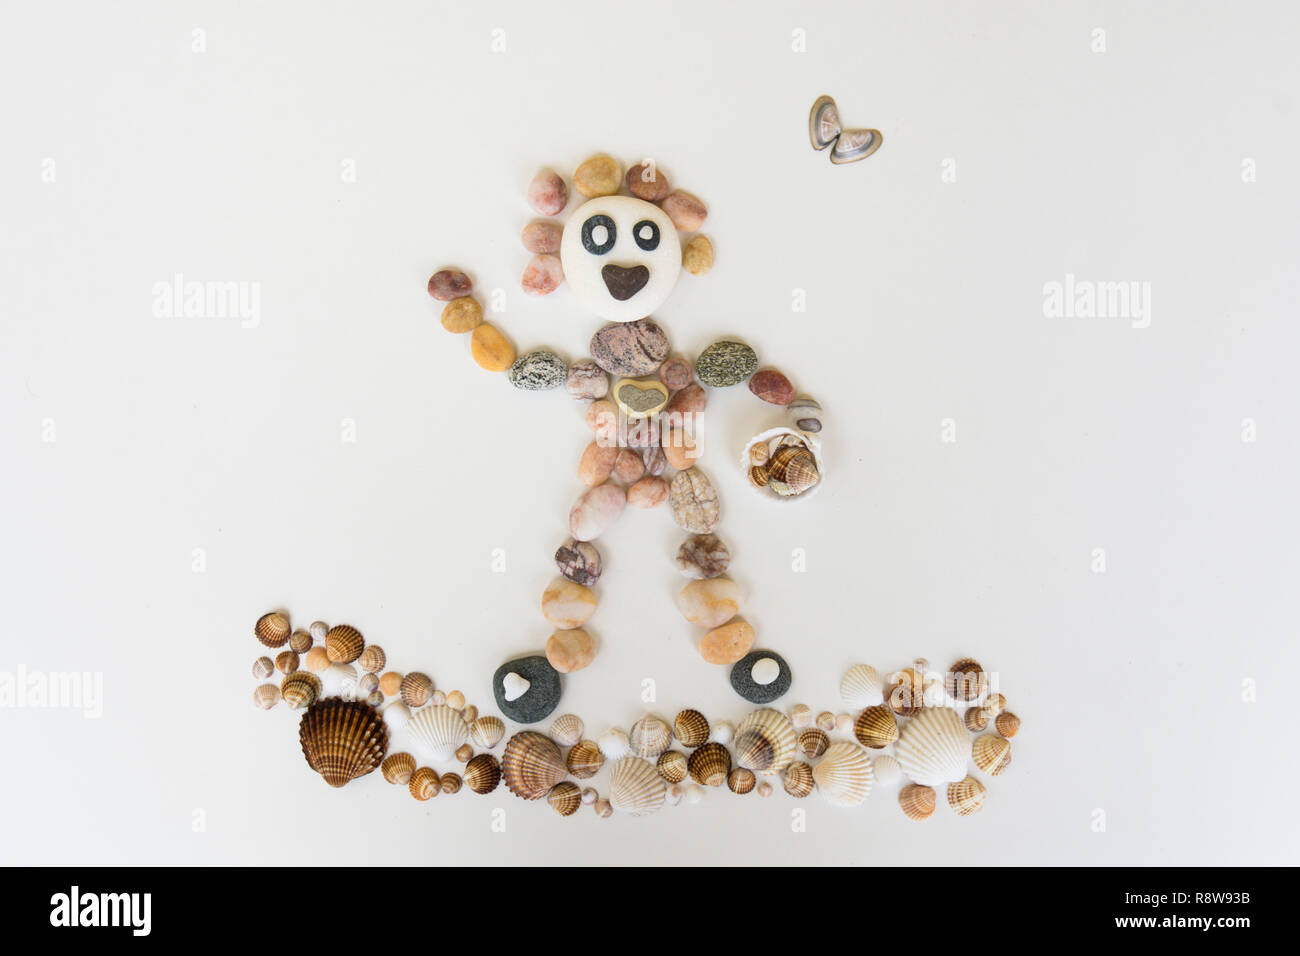 natural art, craft, picture of person surfing, made from pebbles, shells, Stock Photo